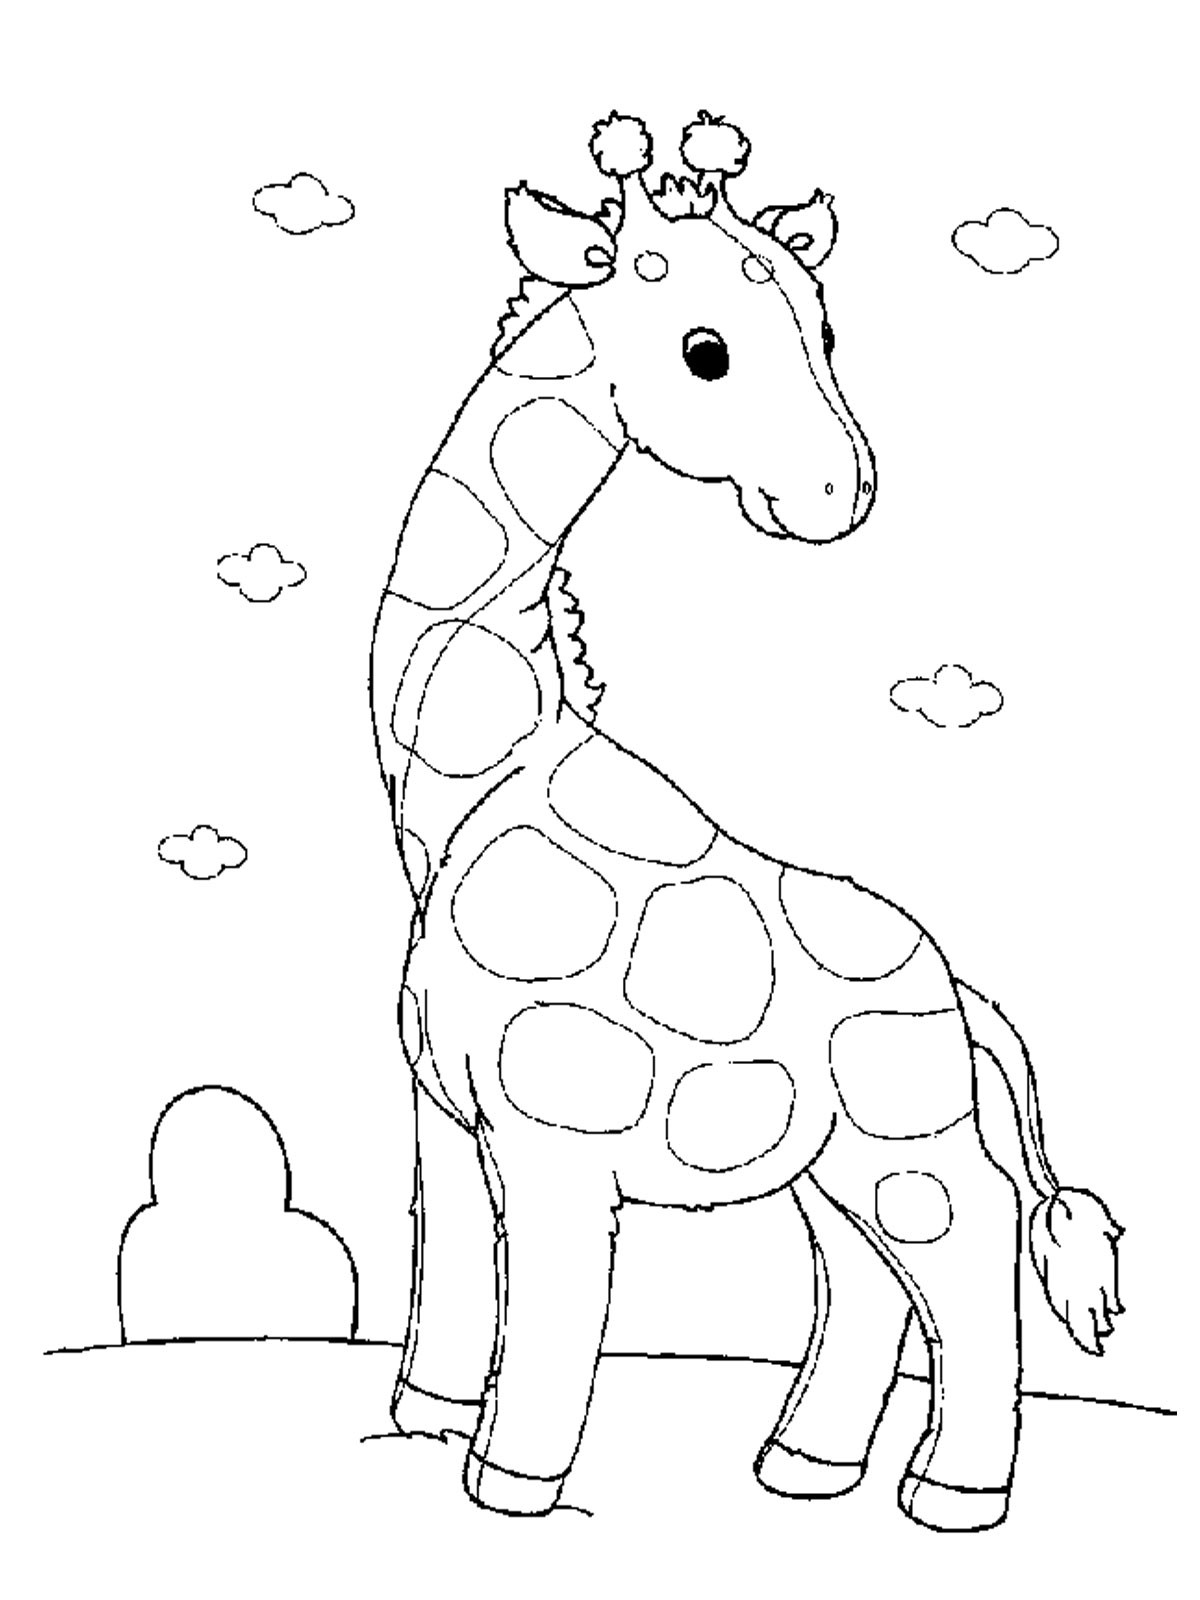 Printable Animal Coloring Pages For Kids
 Baby Animal Coloring Pages